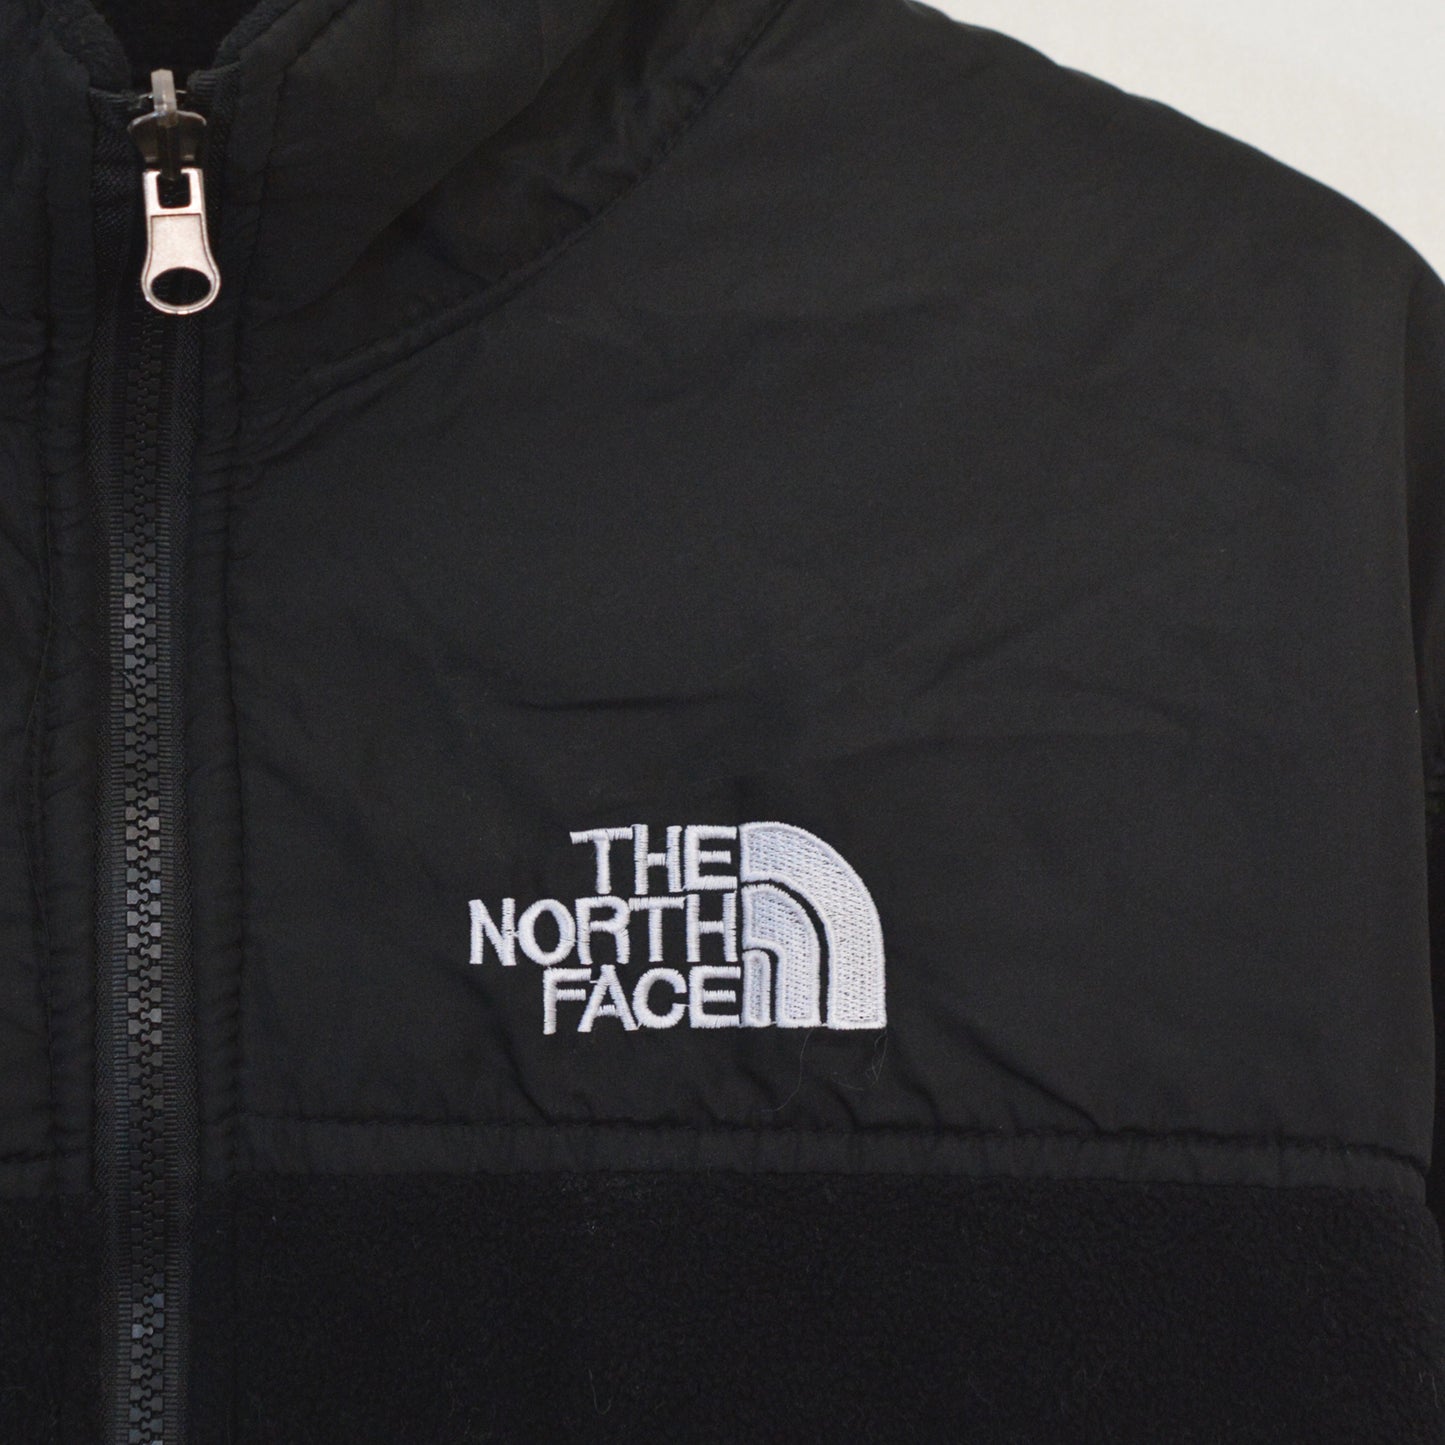 THE NORTH FACE BOOTLEG ПОЛАР (М)